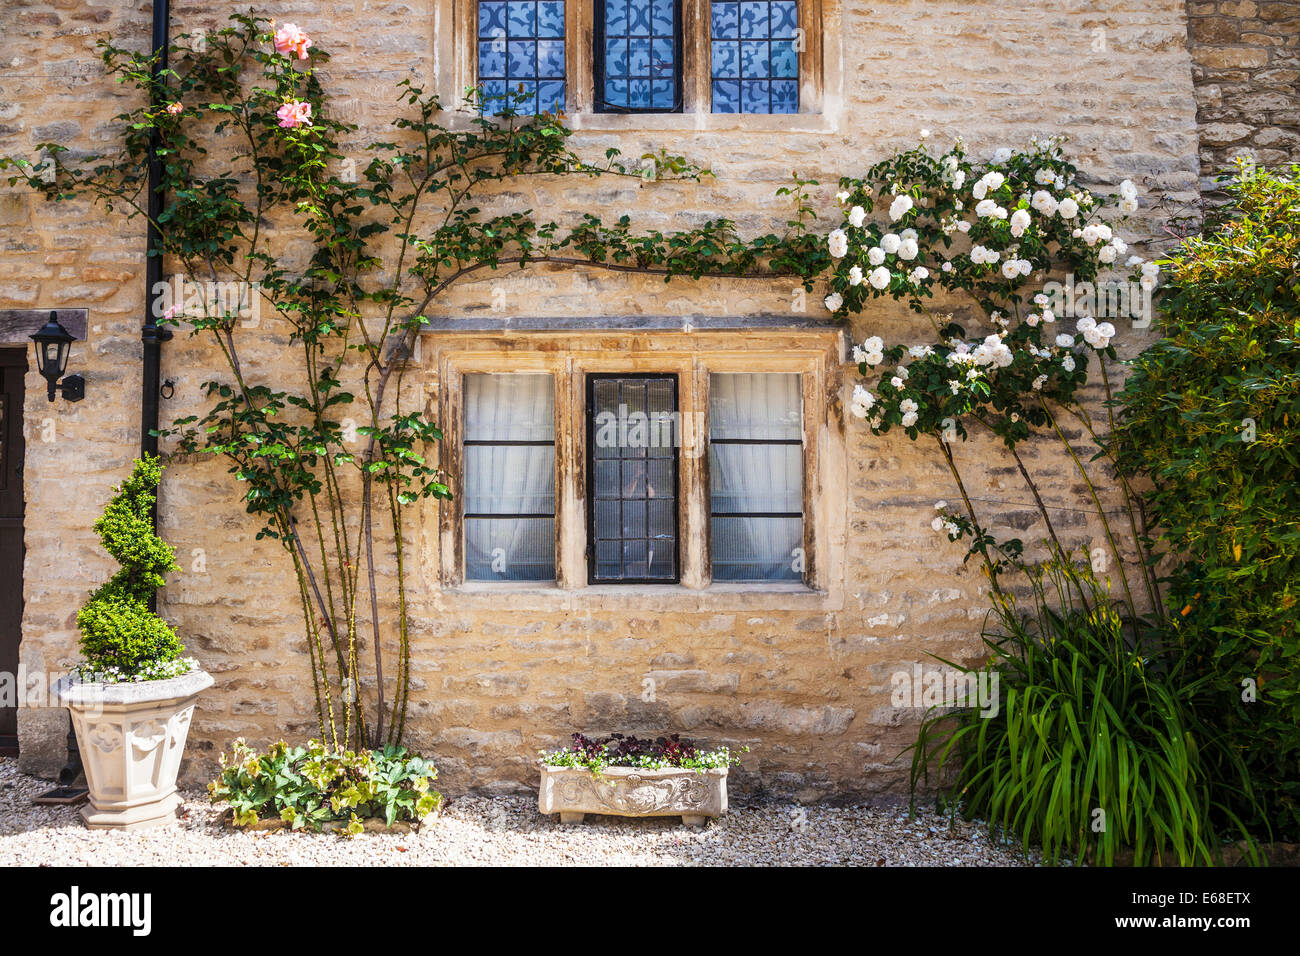 Cotswold stone house front with mullioned, leaded windows and rambling roses. Stock Photo